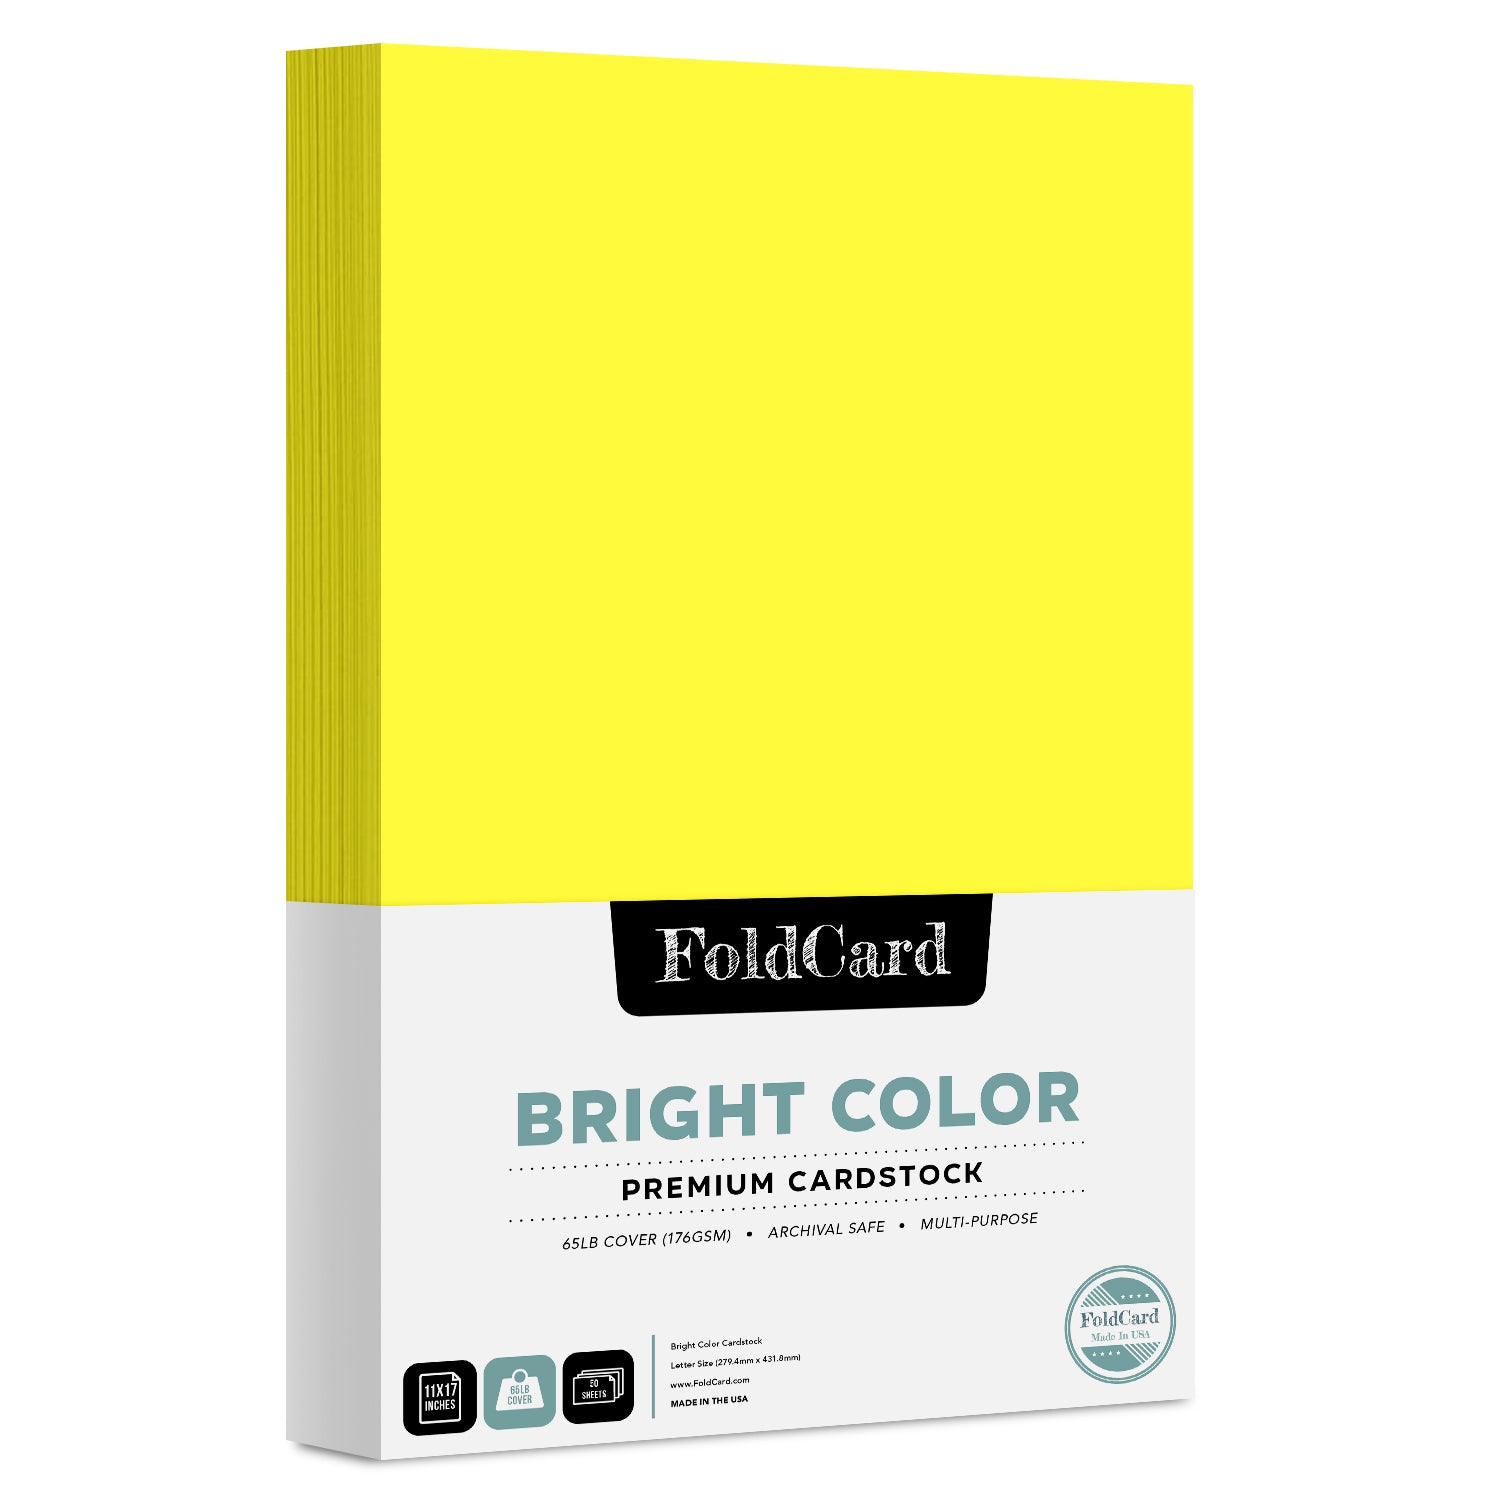 Vibrant Bright Color Cardstock for DIY Art Projects - 11x17 50 Sheets